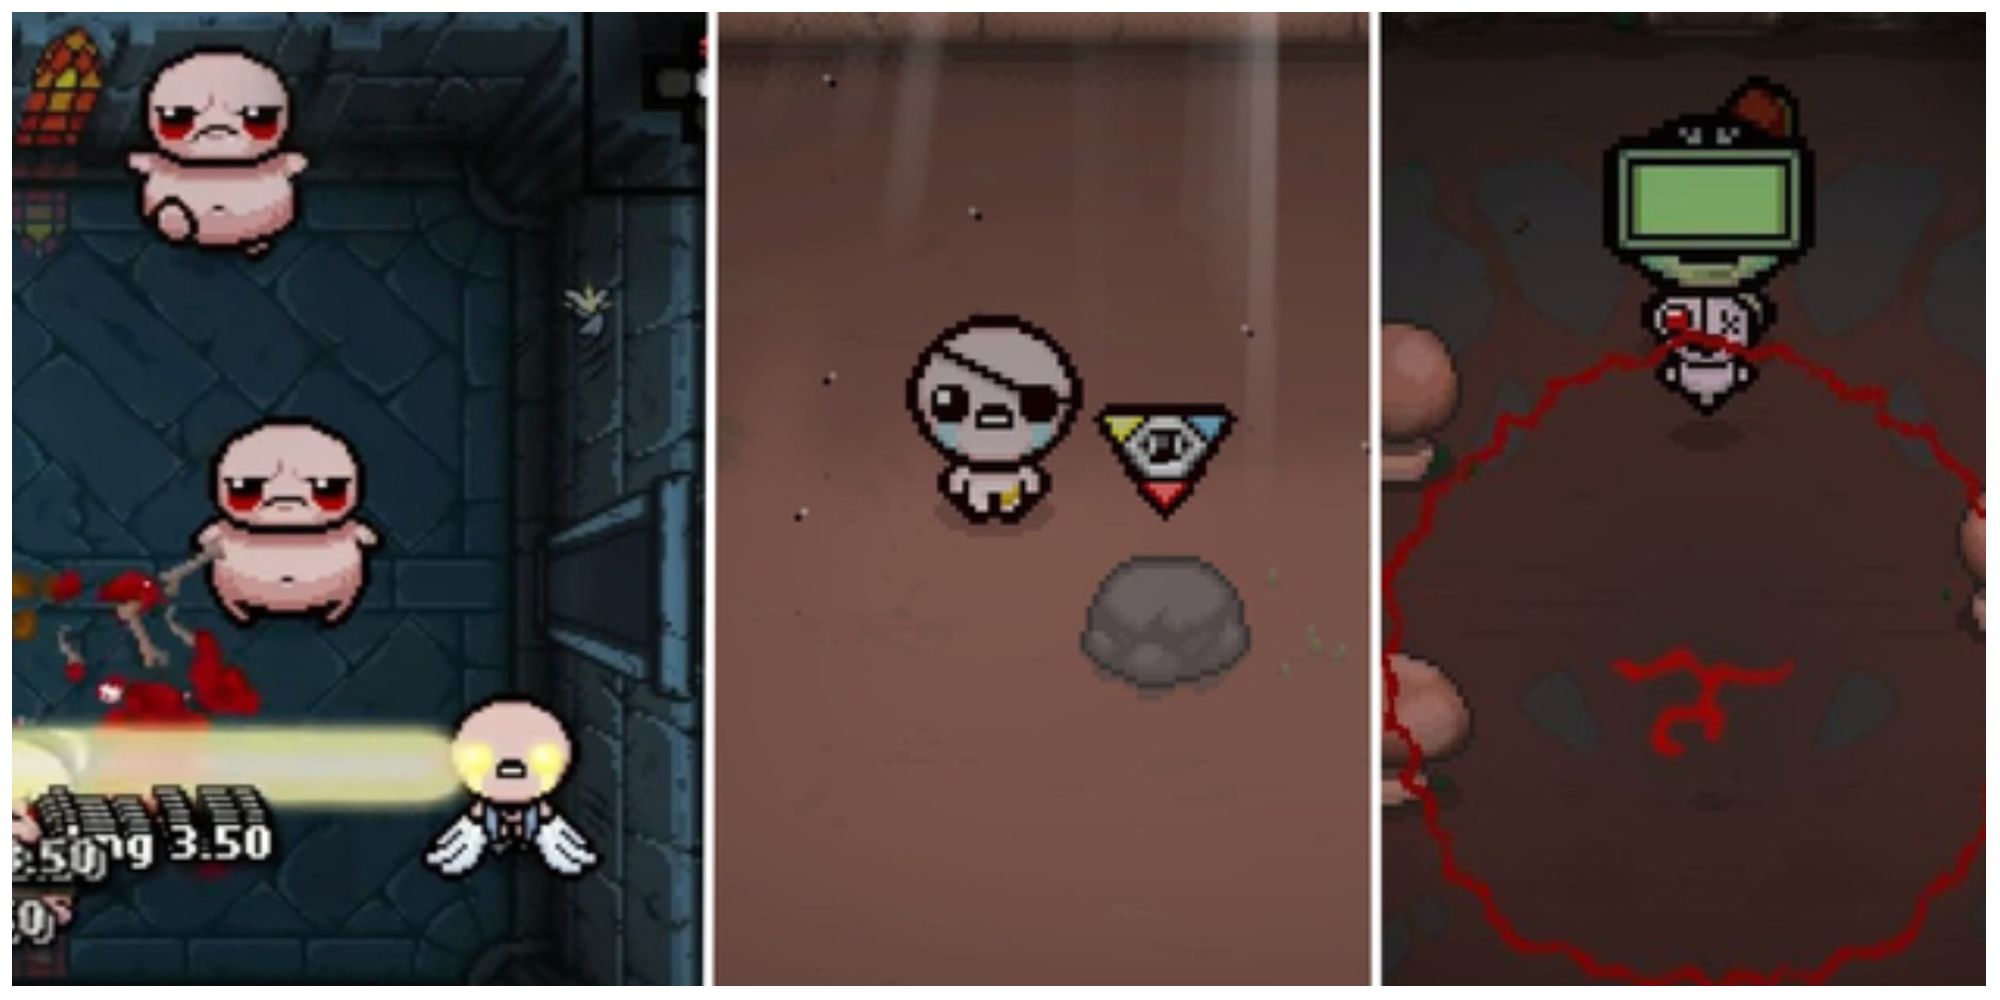 Binding of Isaac feature using God Head, an angel blast and more